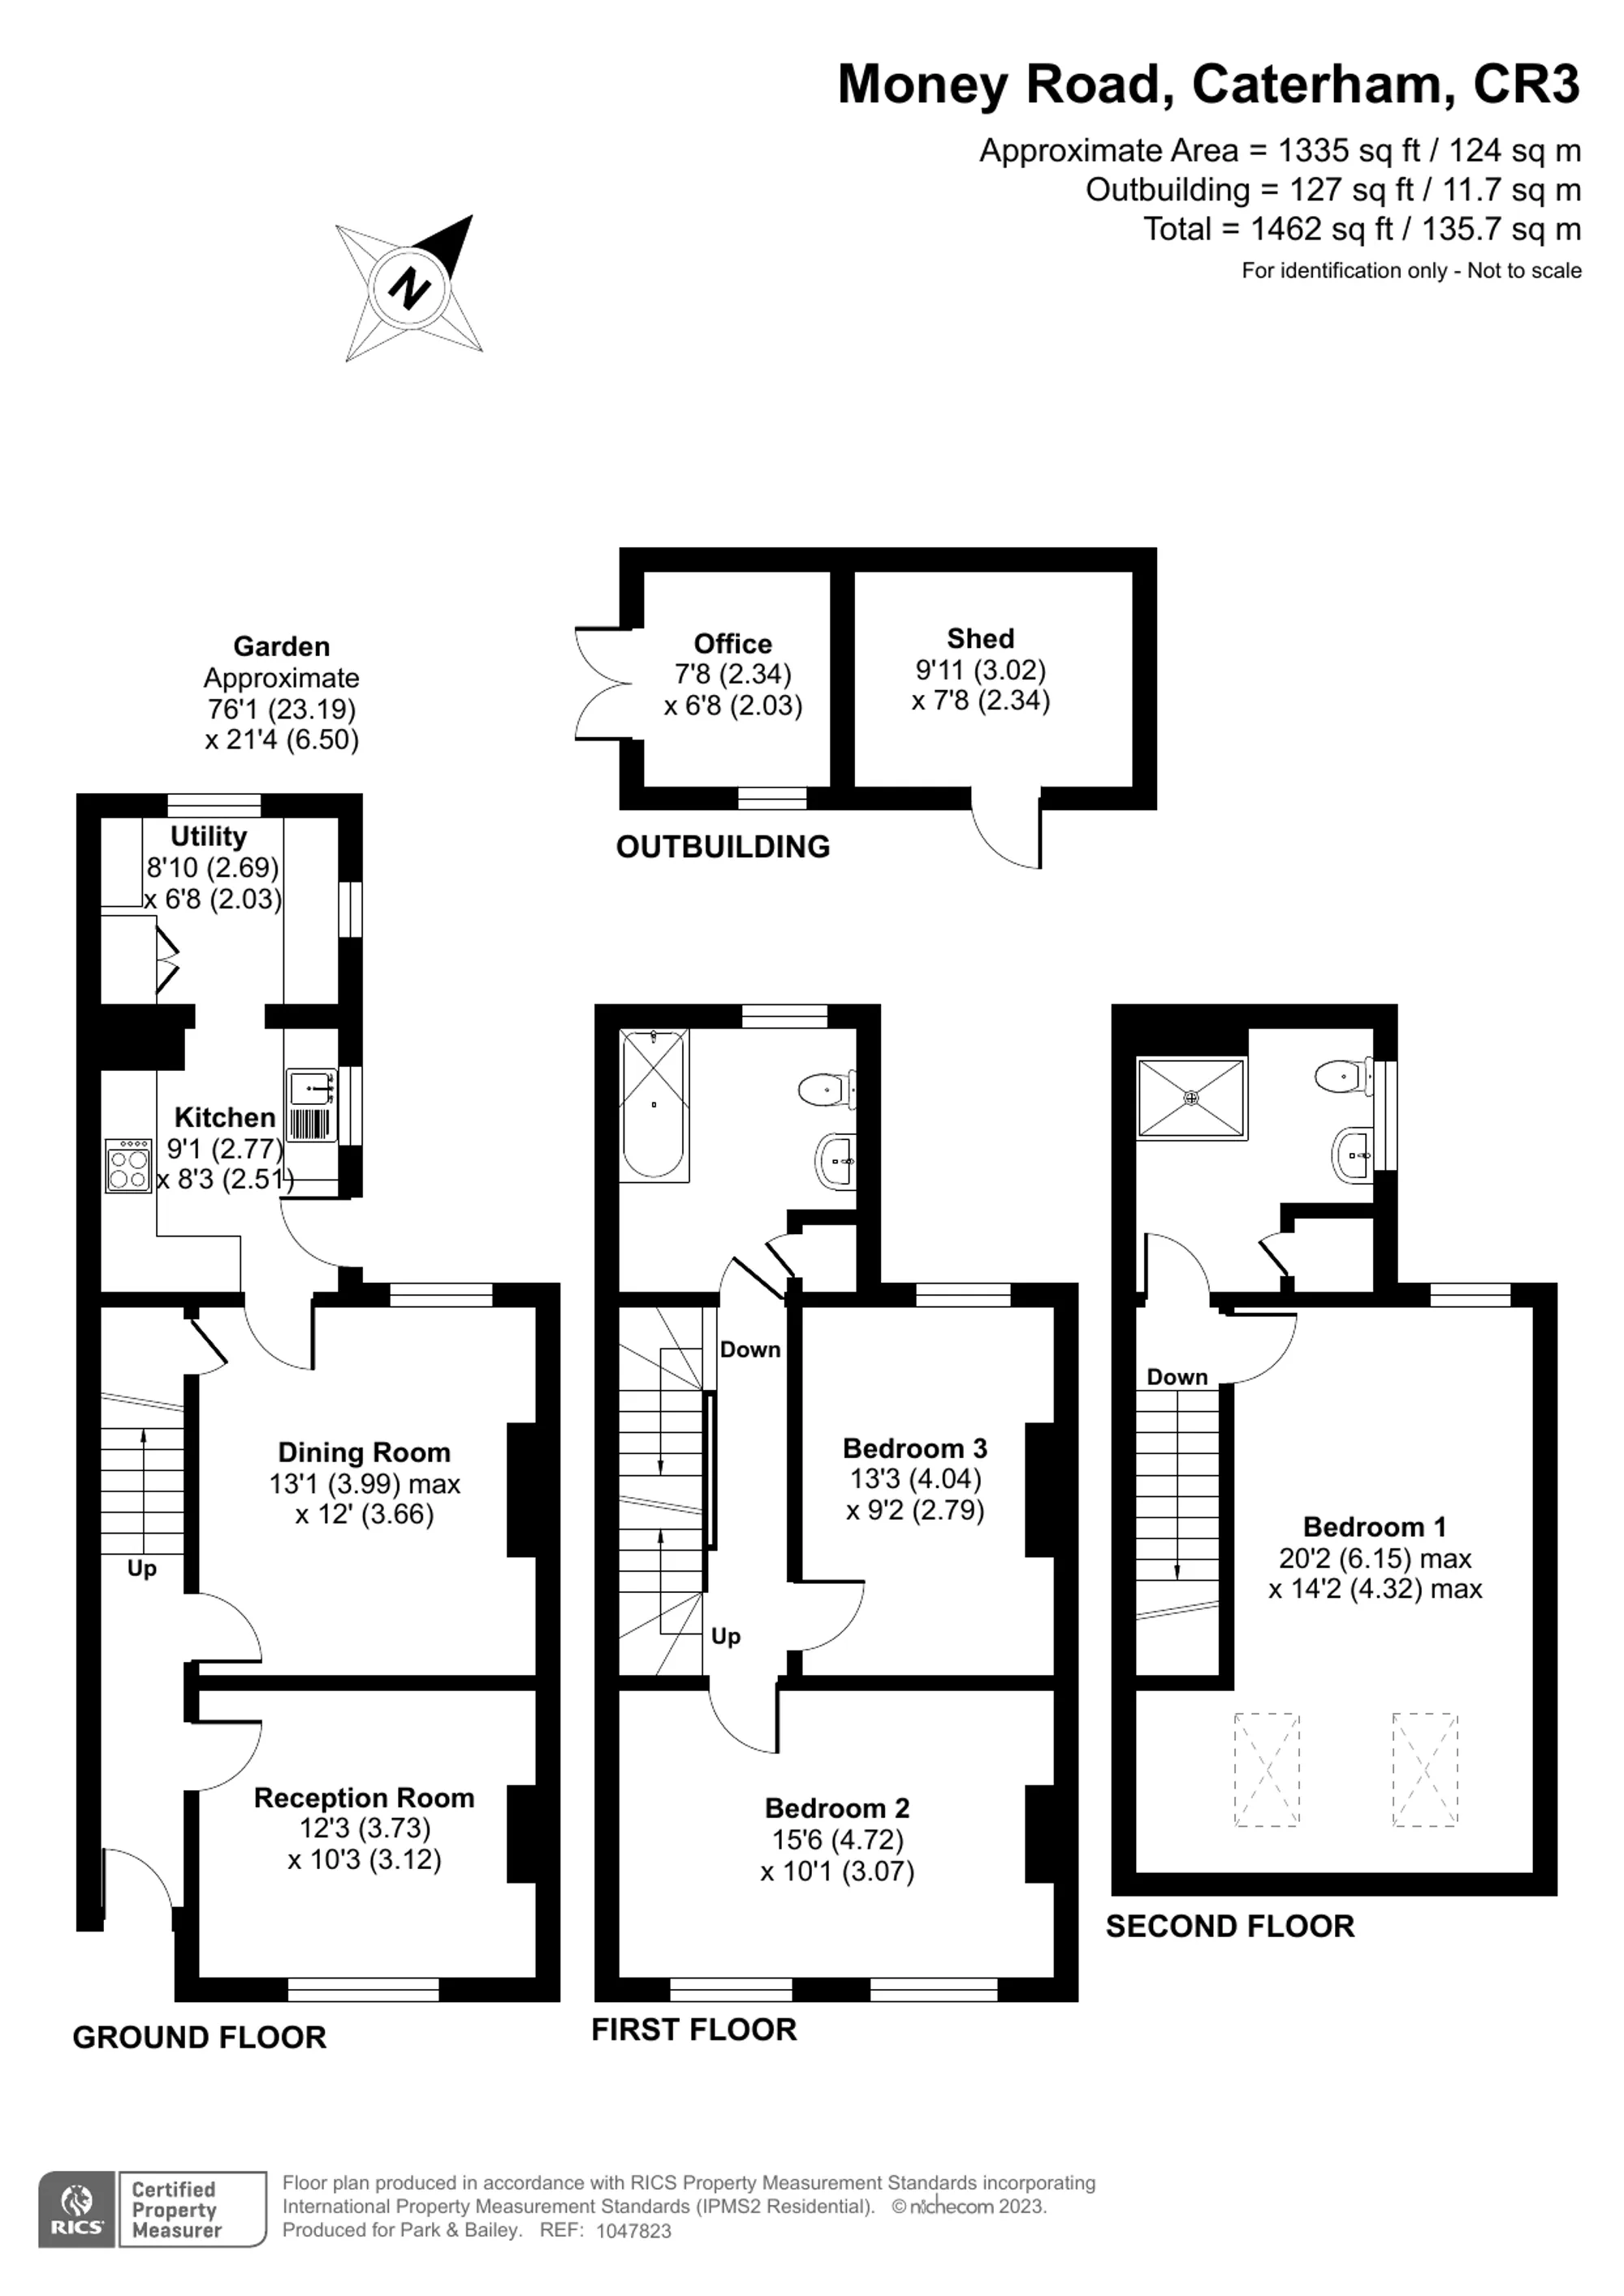 3 bed semi-detached house for sale in Money Road, Caterham - Property floorplan